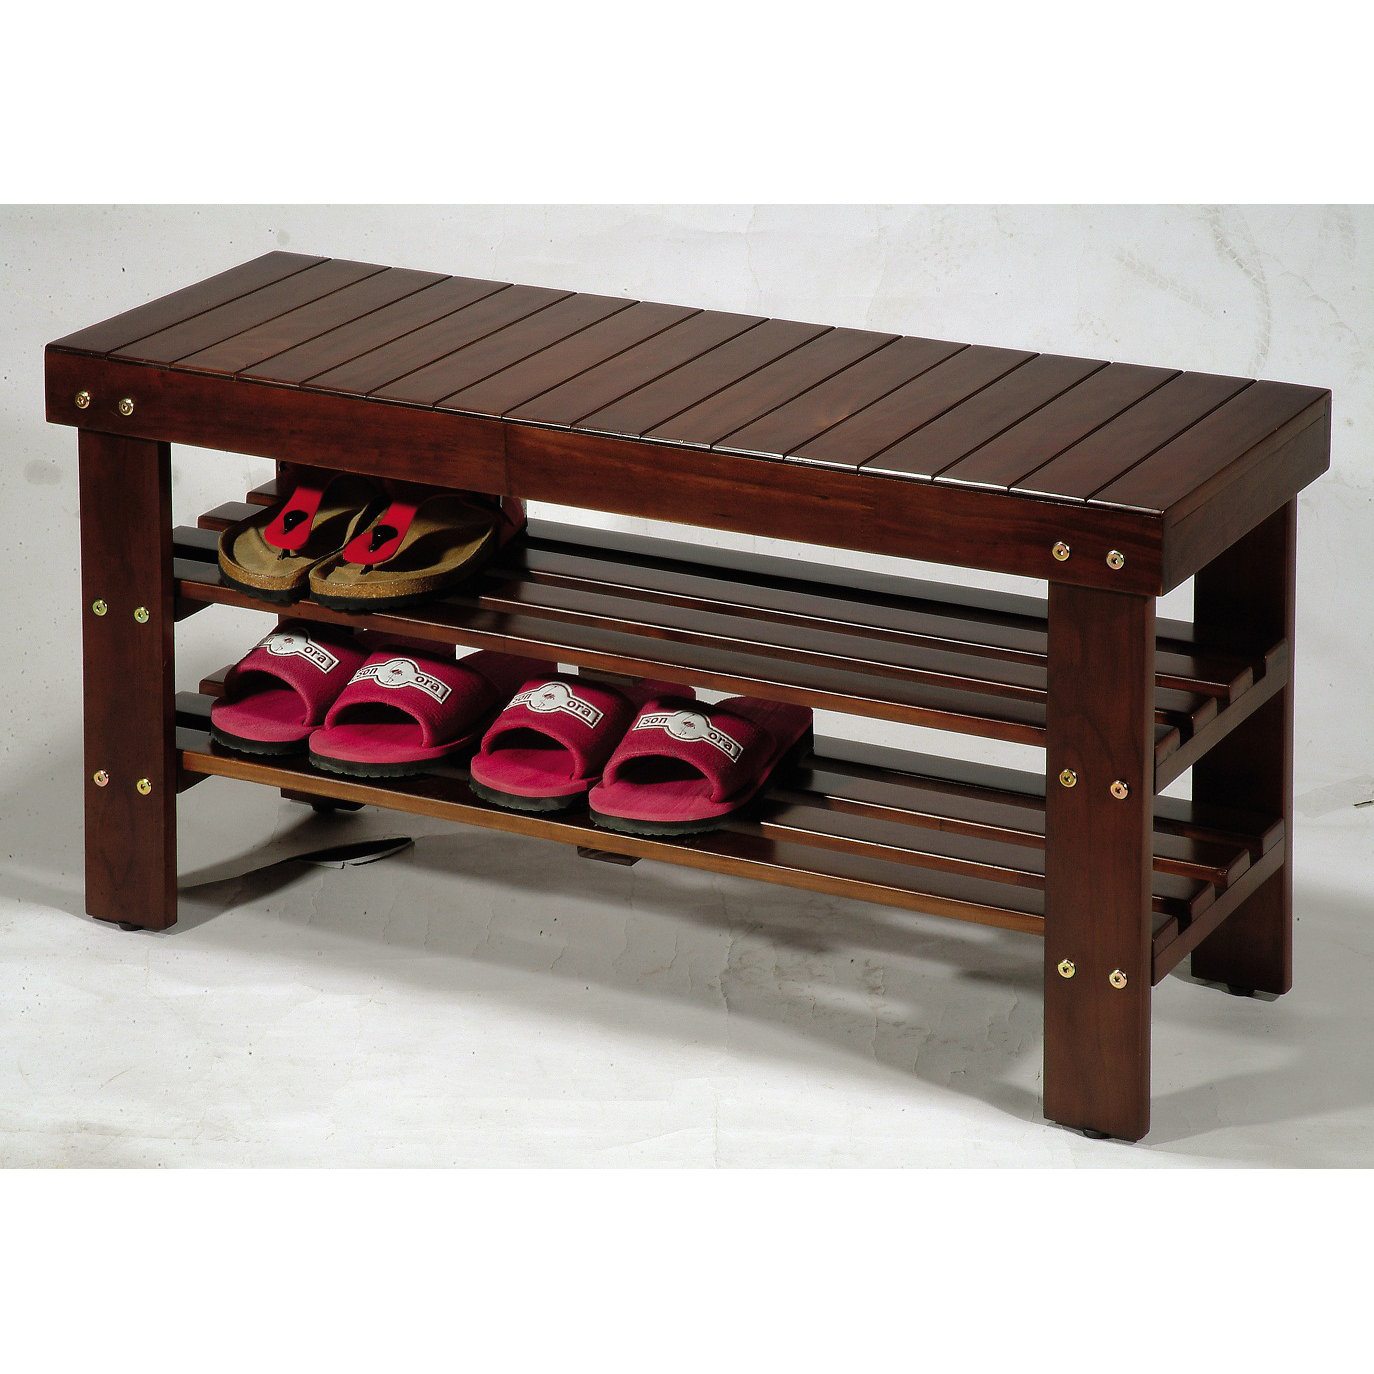 Roundhill Furniture Solid Wood Entryway Bench Reviews 